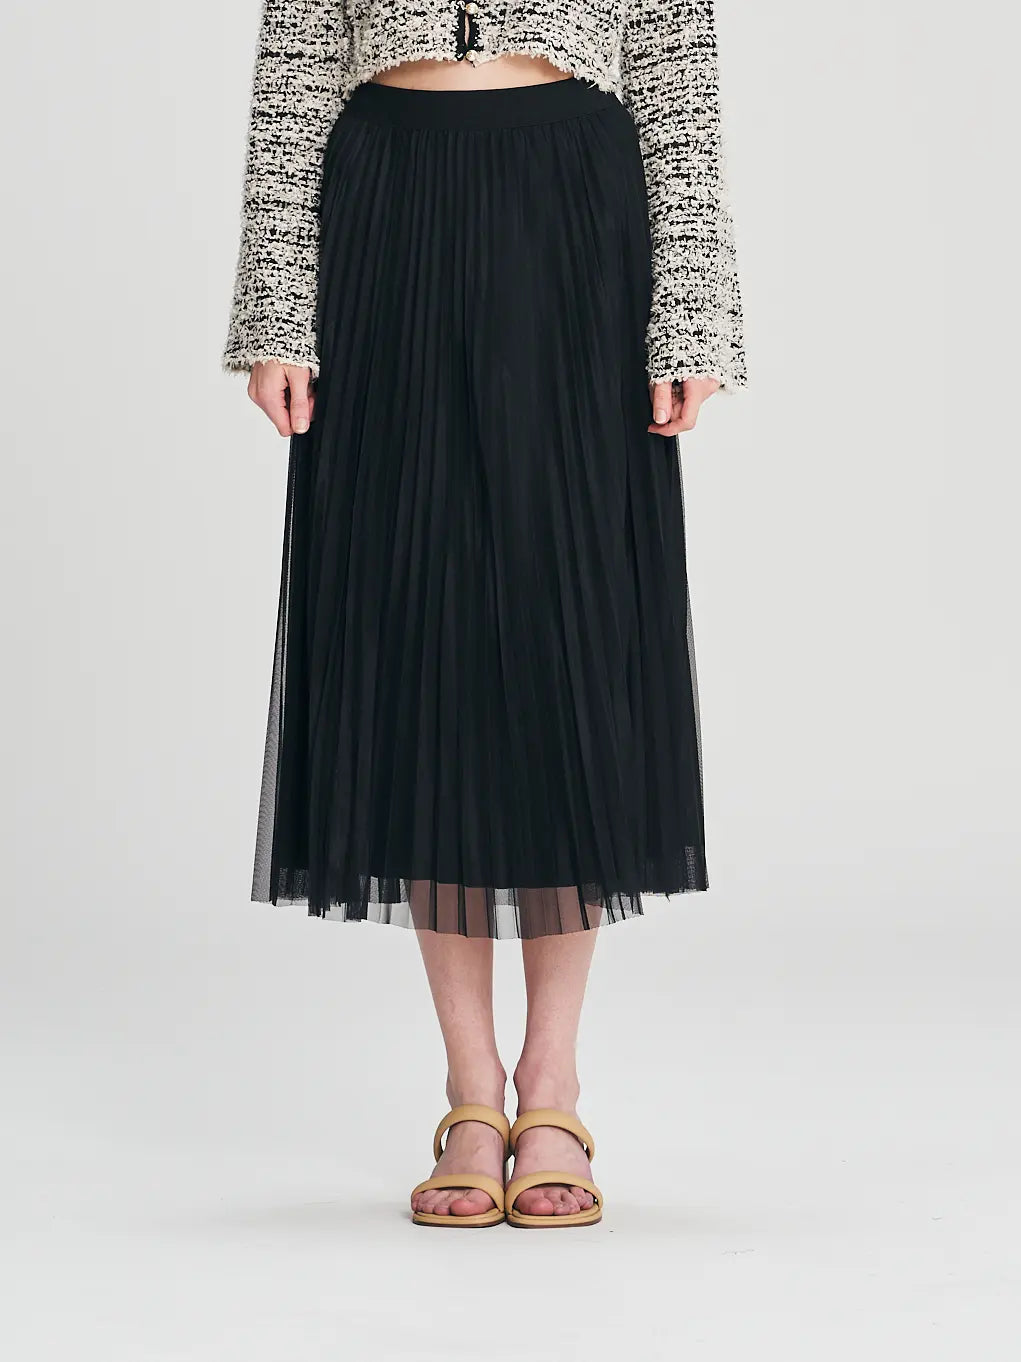 An image of a  Black-One-Size 205519 Reversible Pleated Skirt by  Mirra Masa